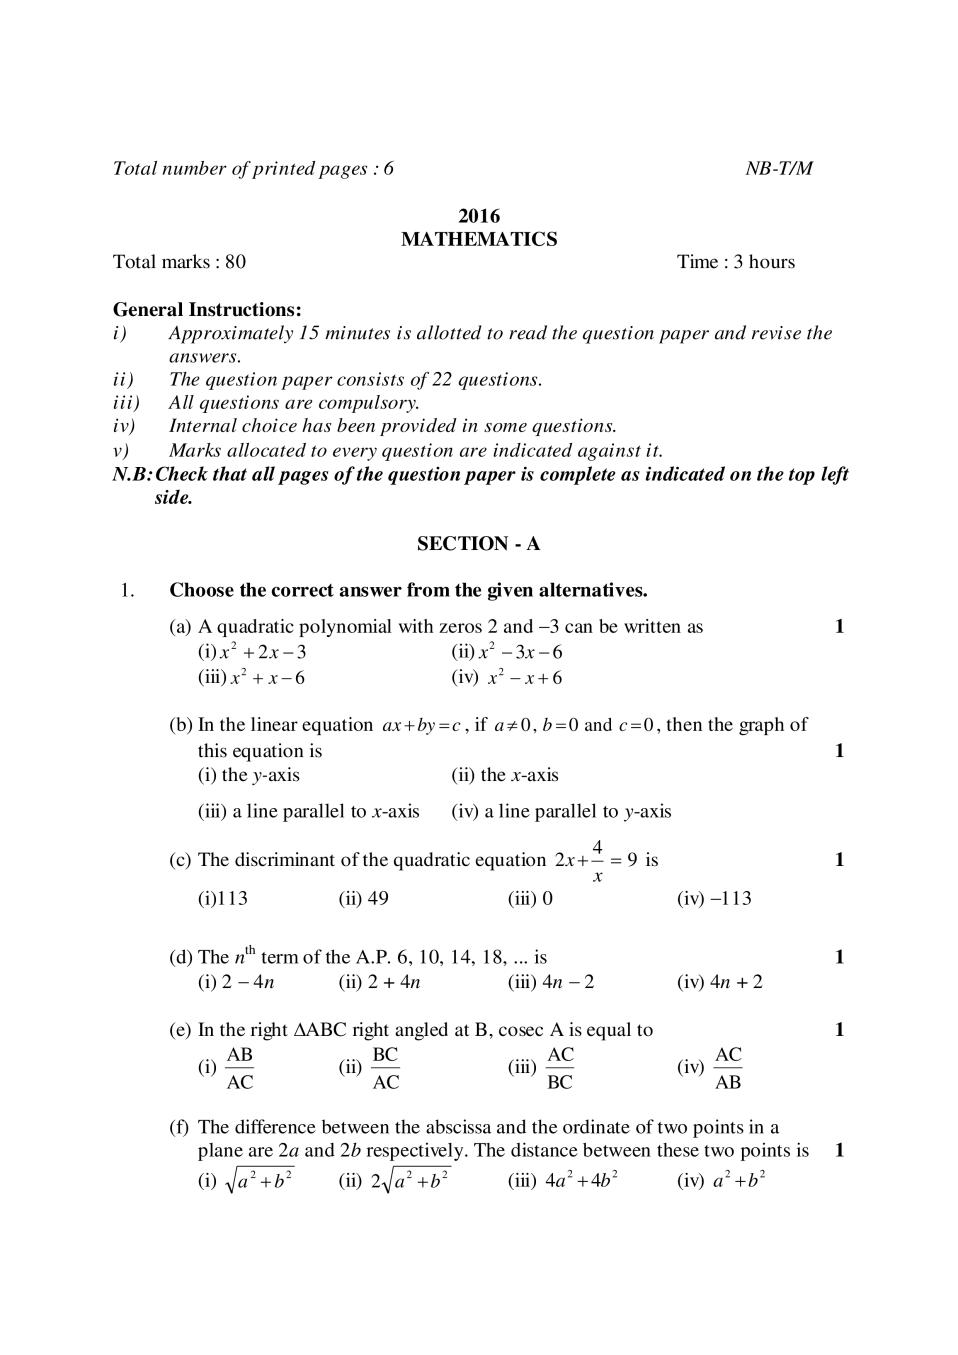 NBSE Class 10 Question Paper 2016 for Maths - Page 1